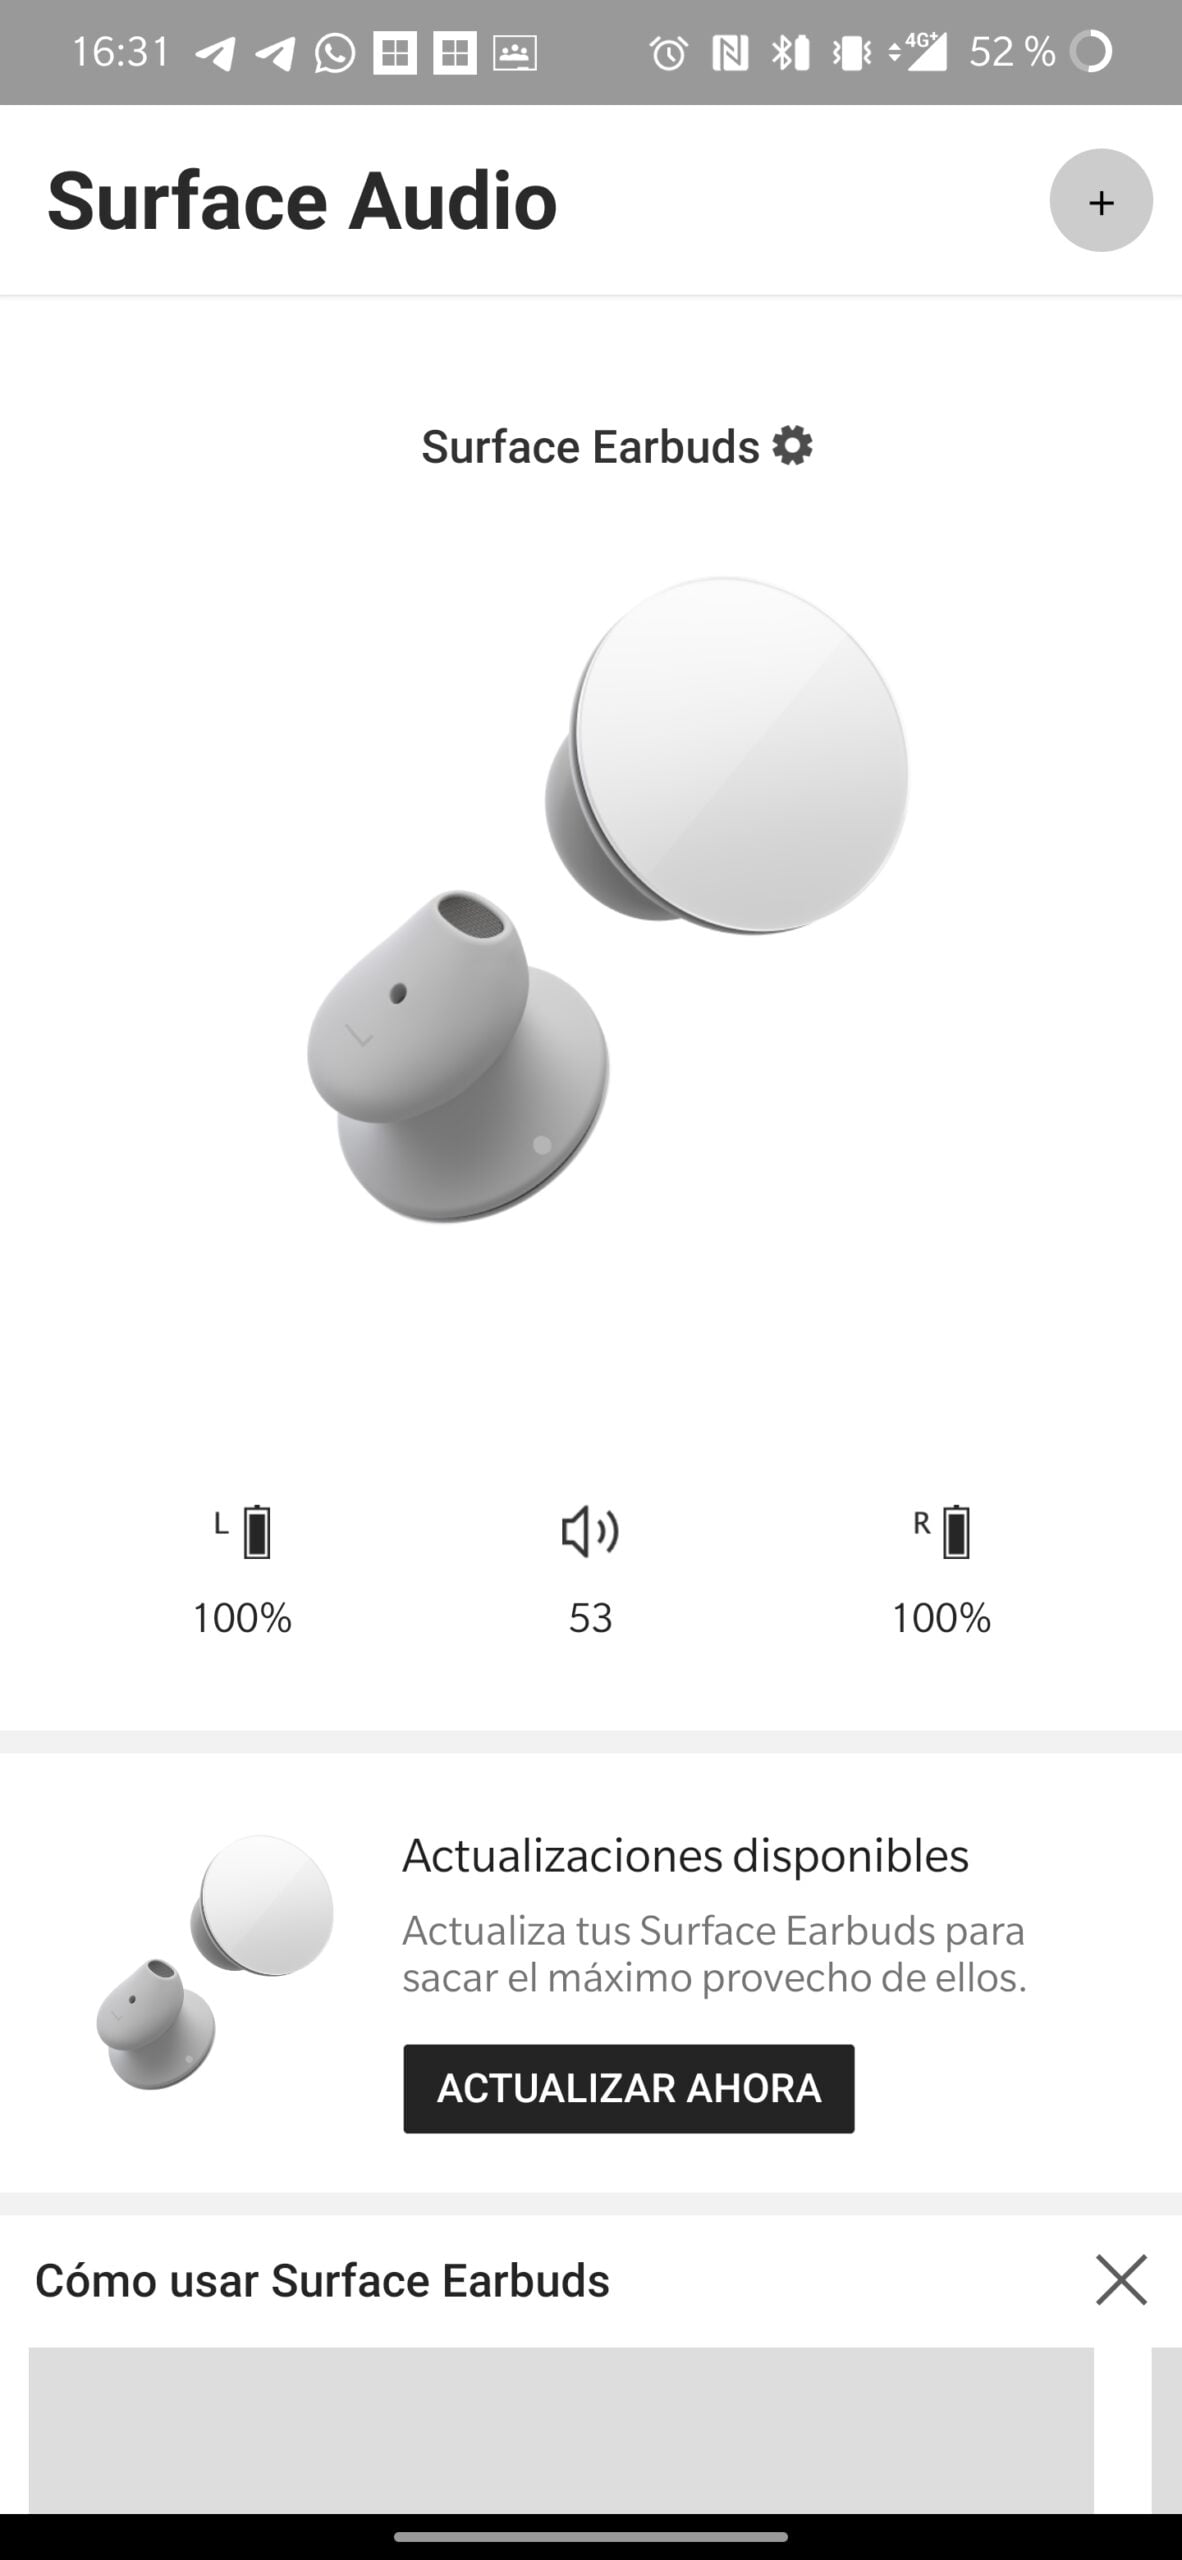 Conectar los Surface Earbuds 2